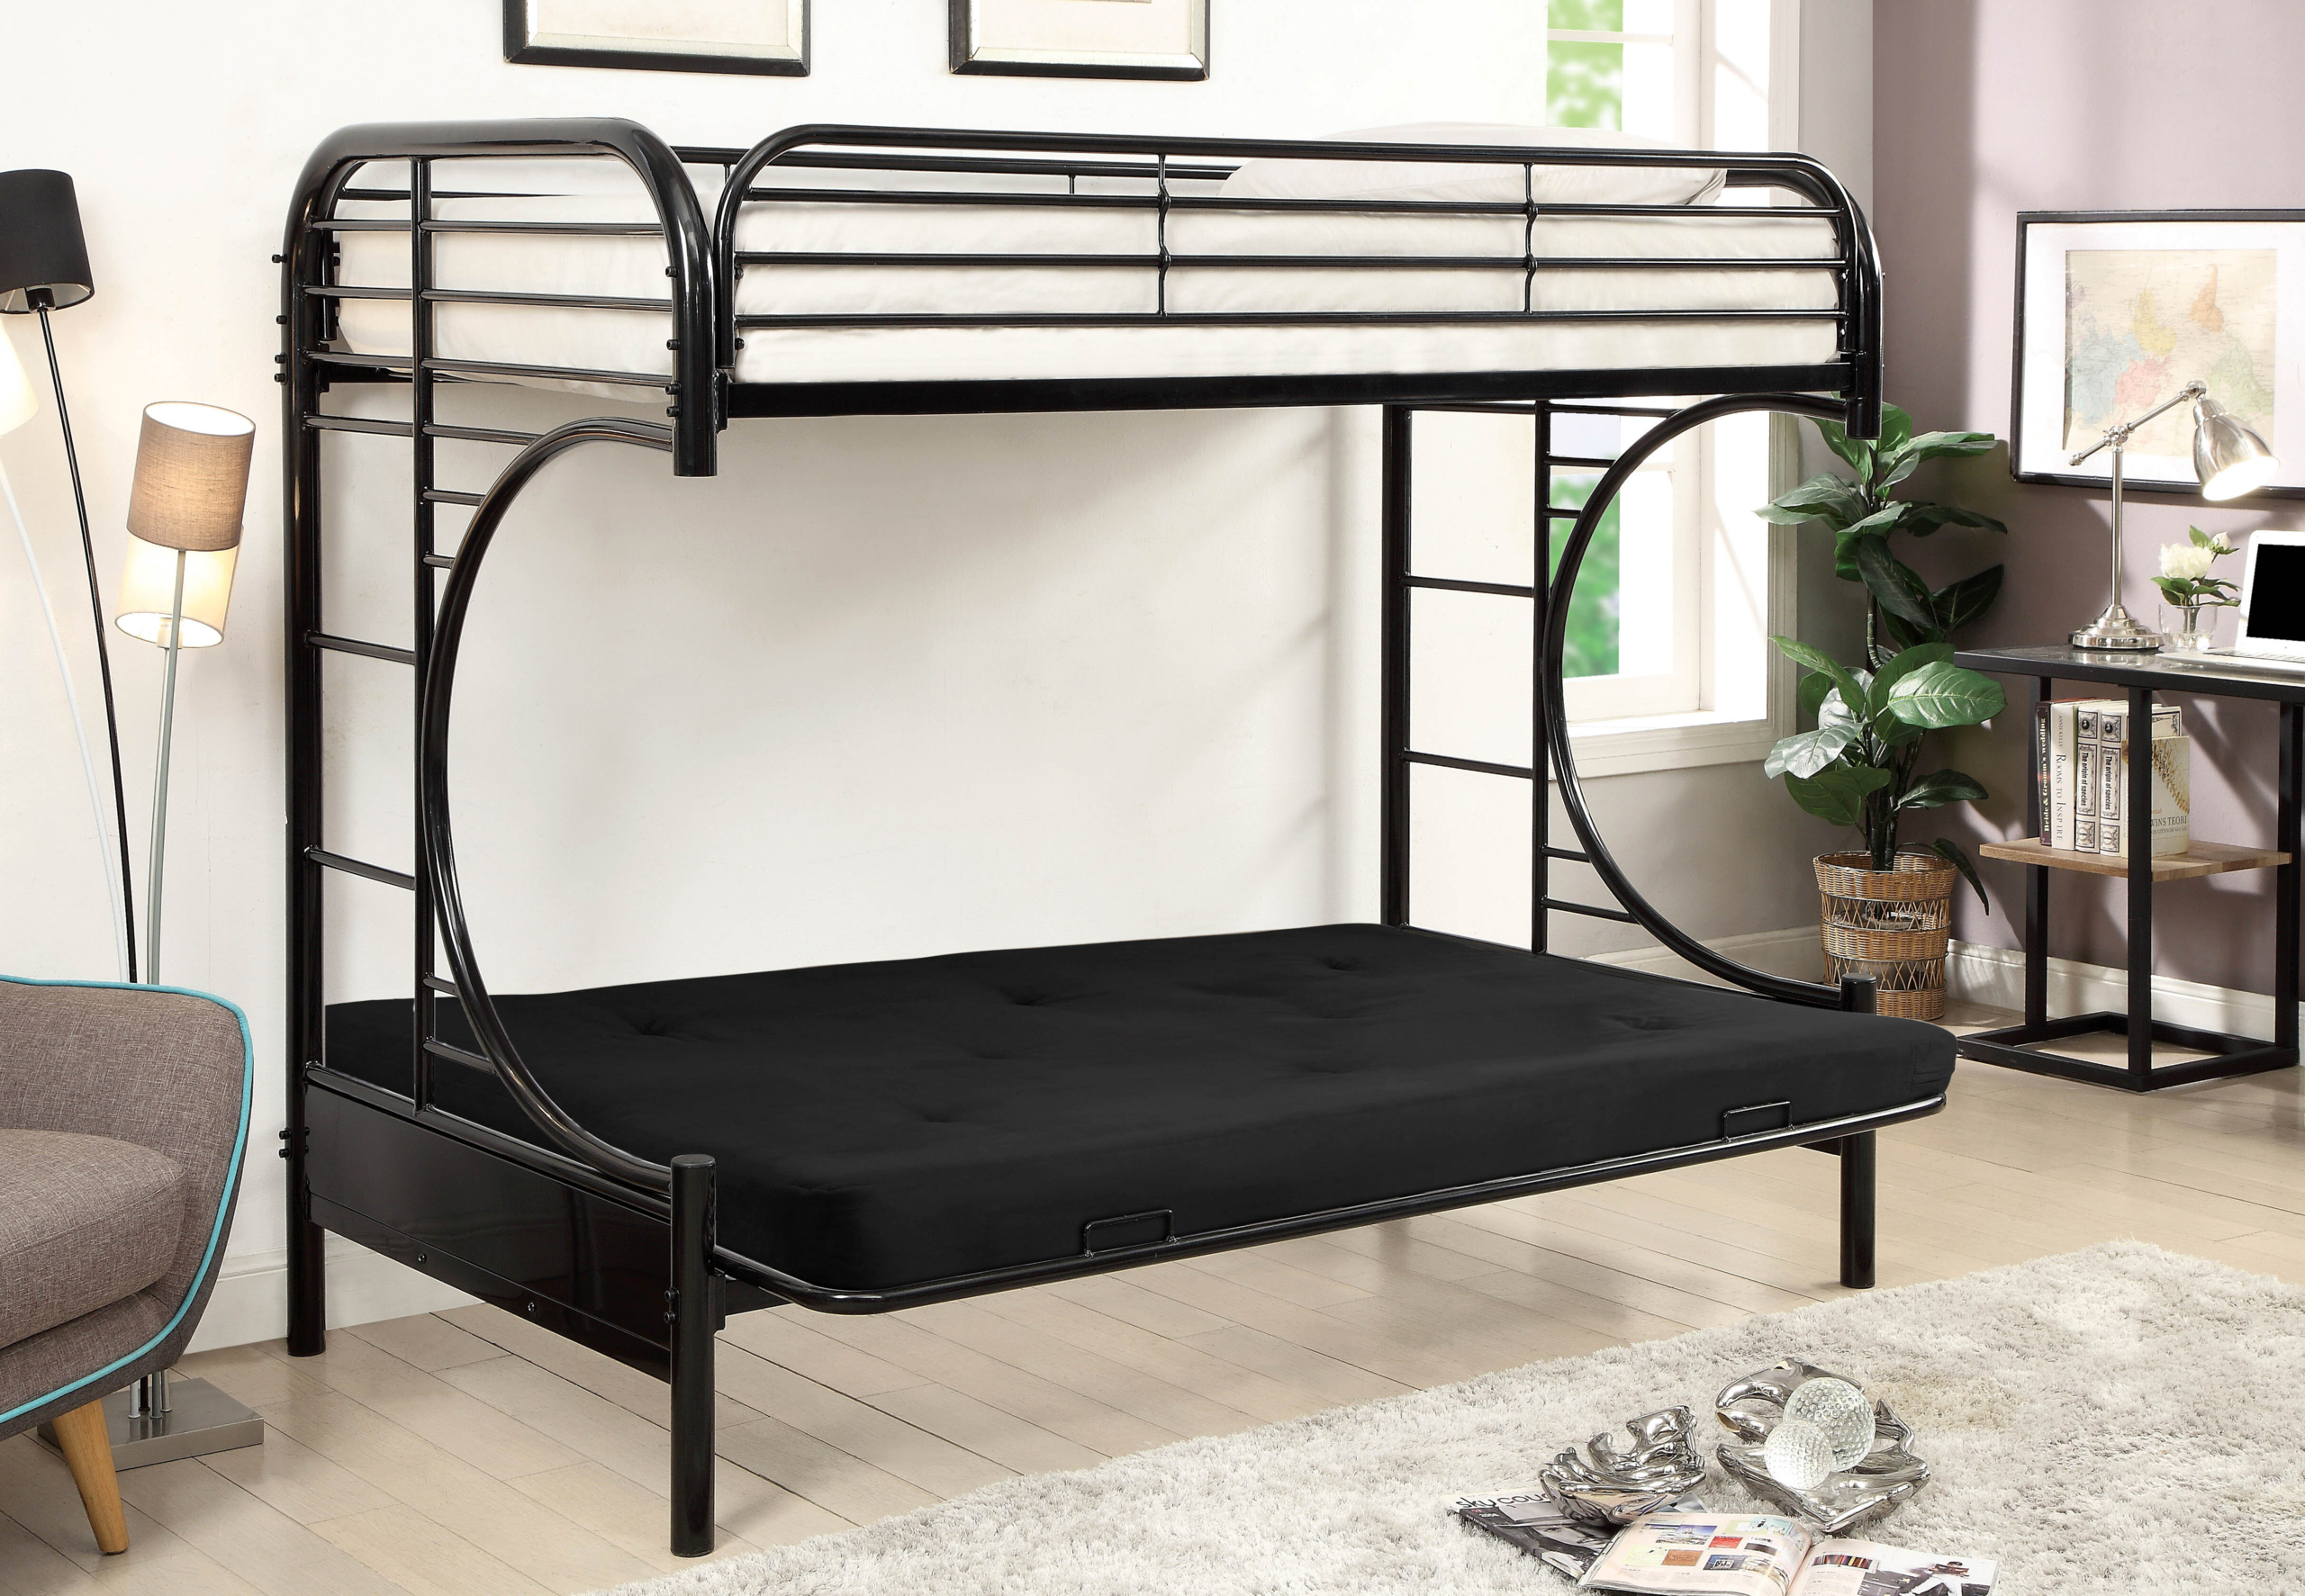 Full Over Futon Bunk Bed Visualhunt, Full Over Futon Bunk Bed Wood